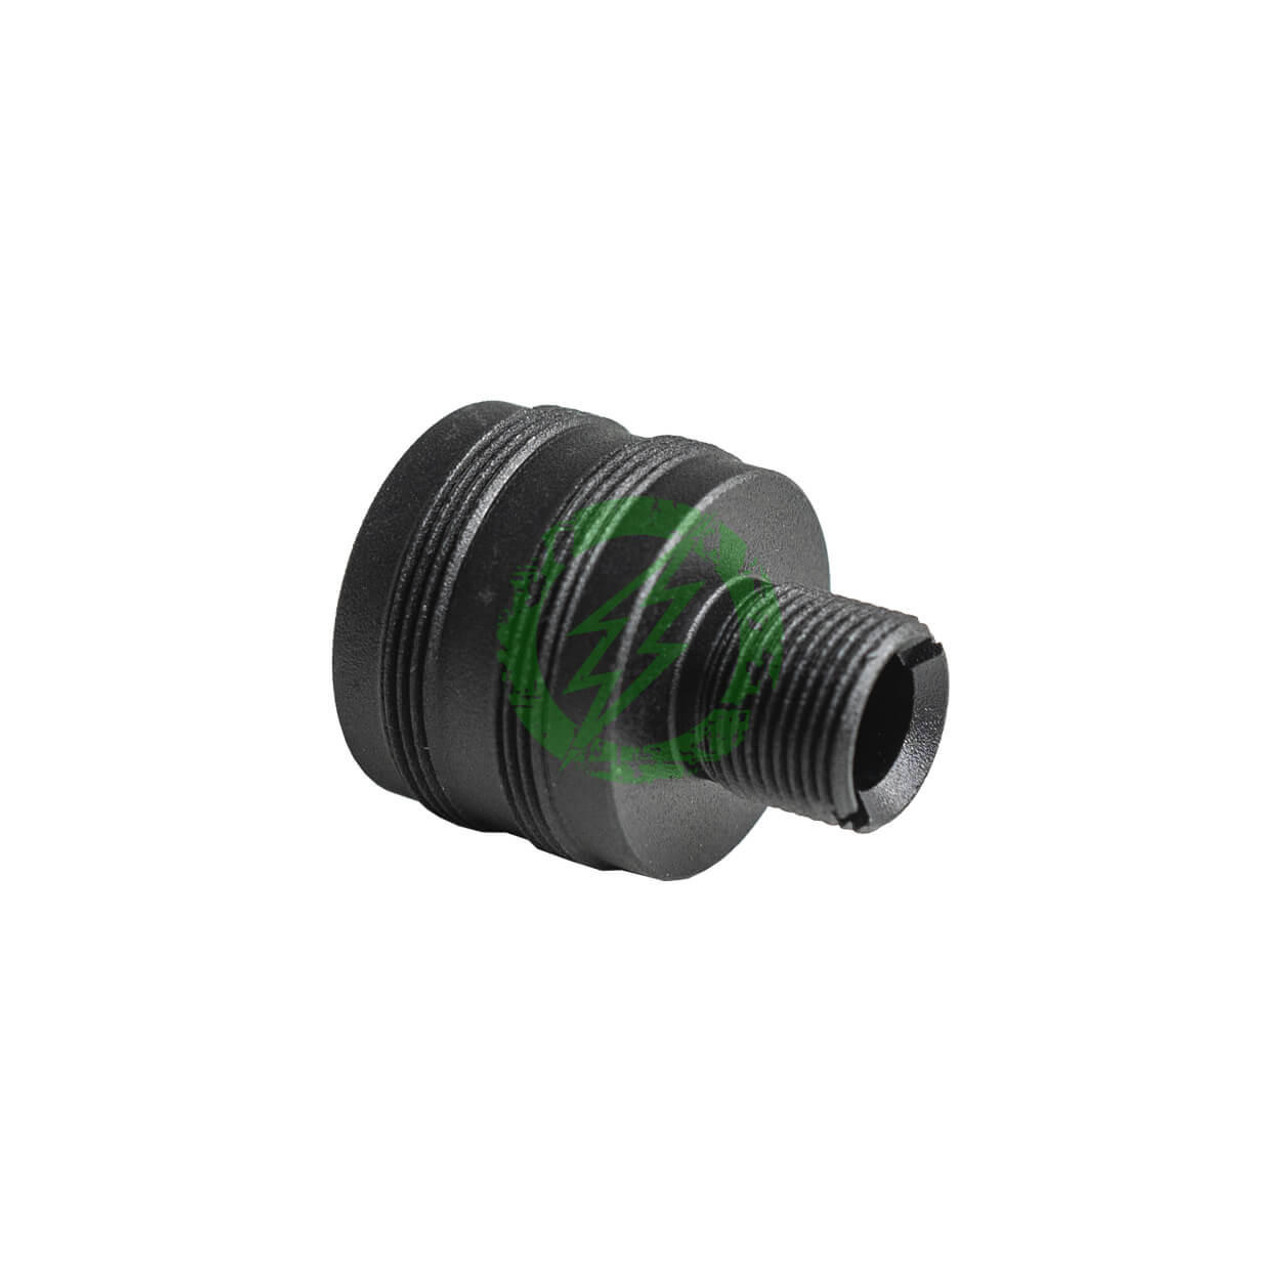  G&G Muzzle Adapter for SSG-1 | 14mm CCW 